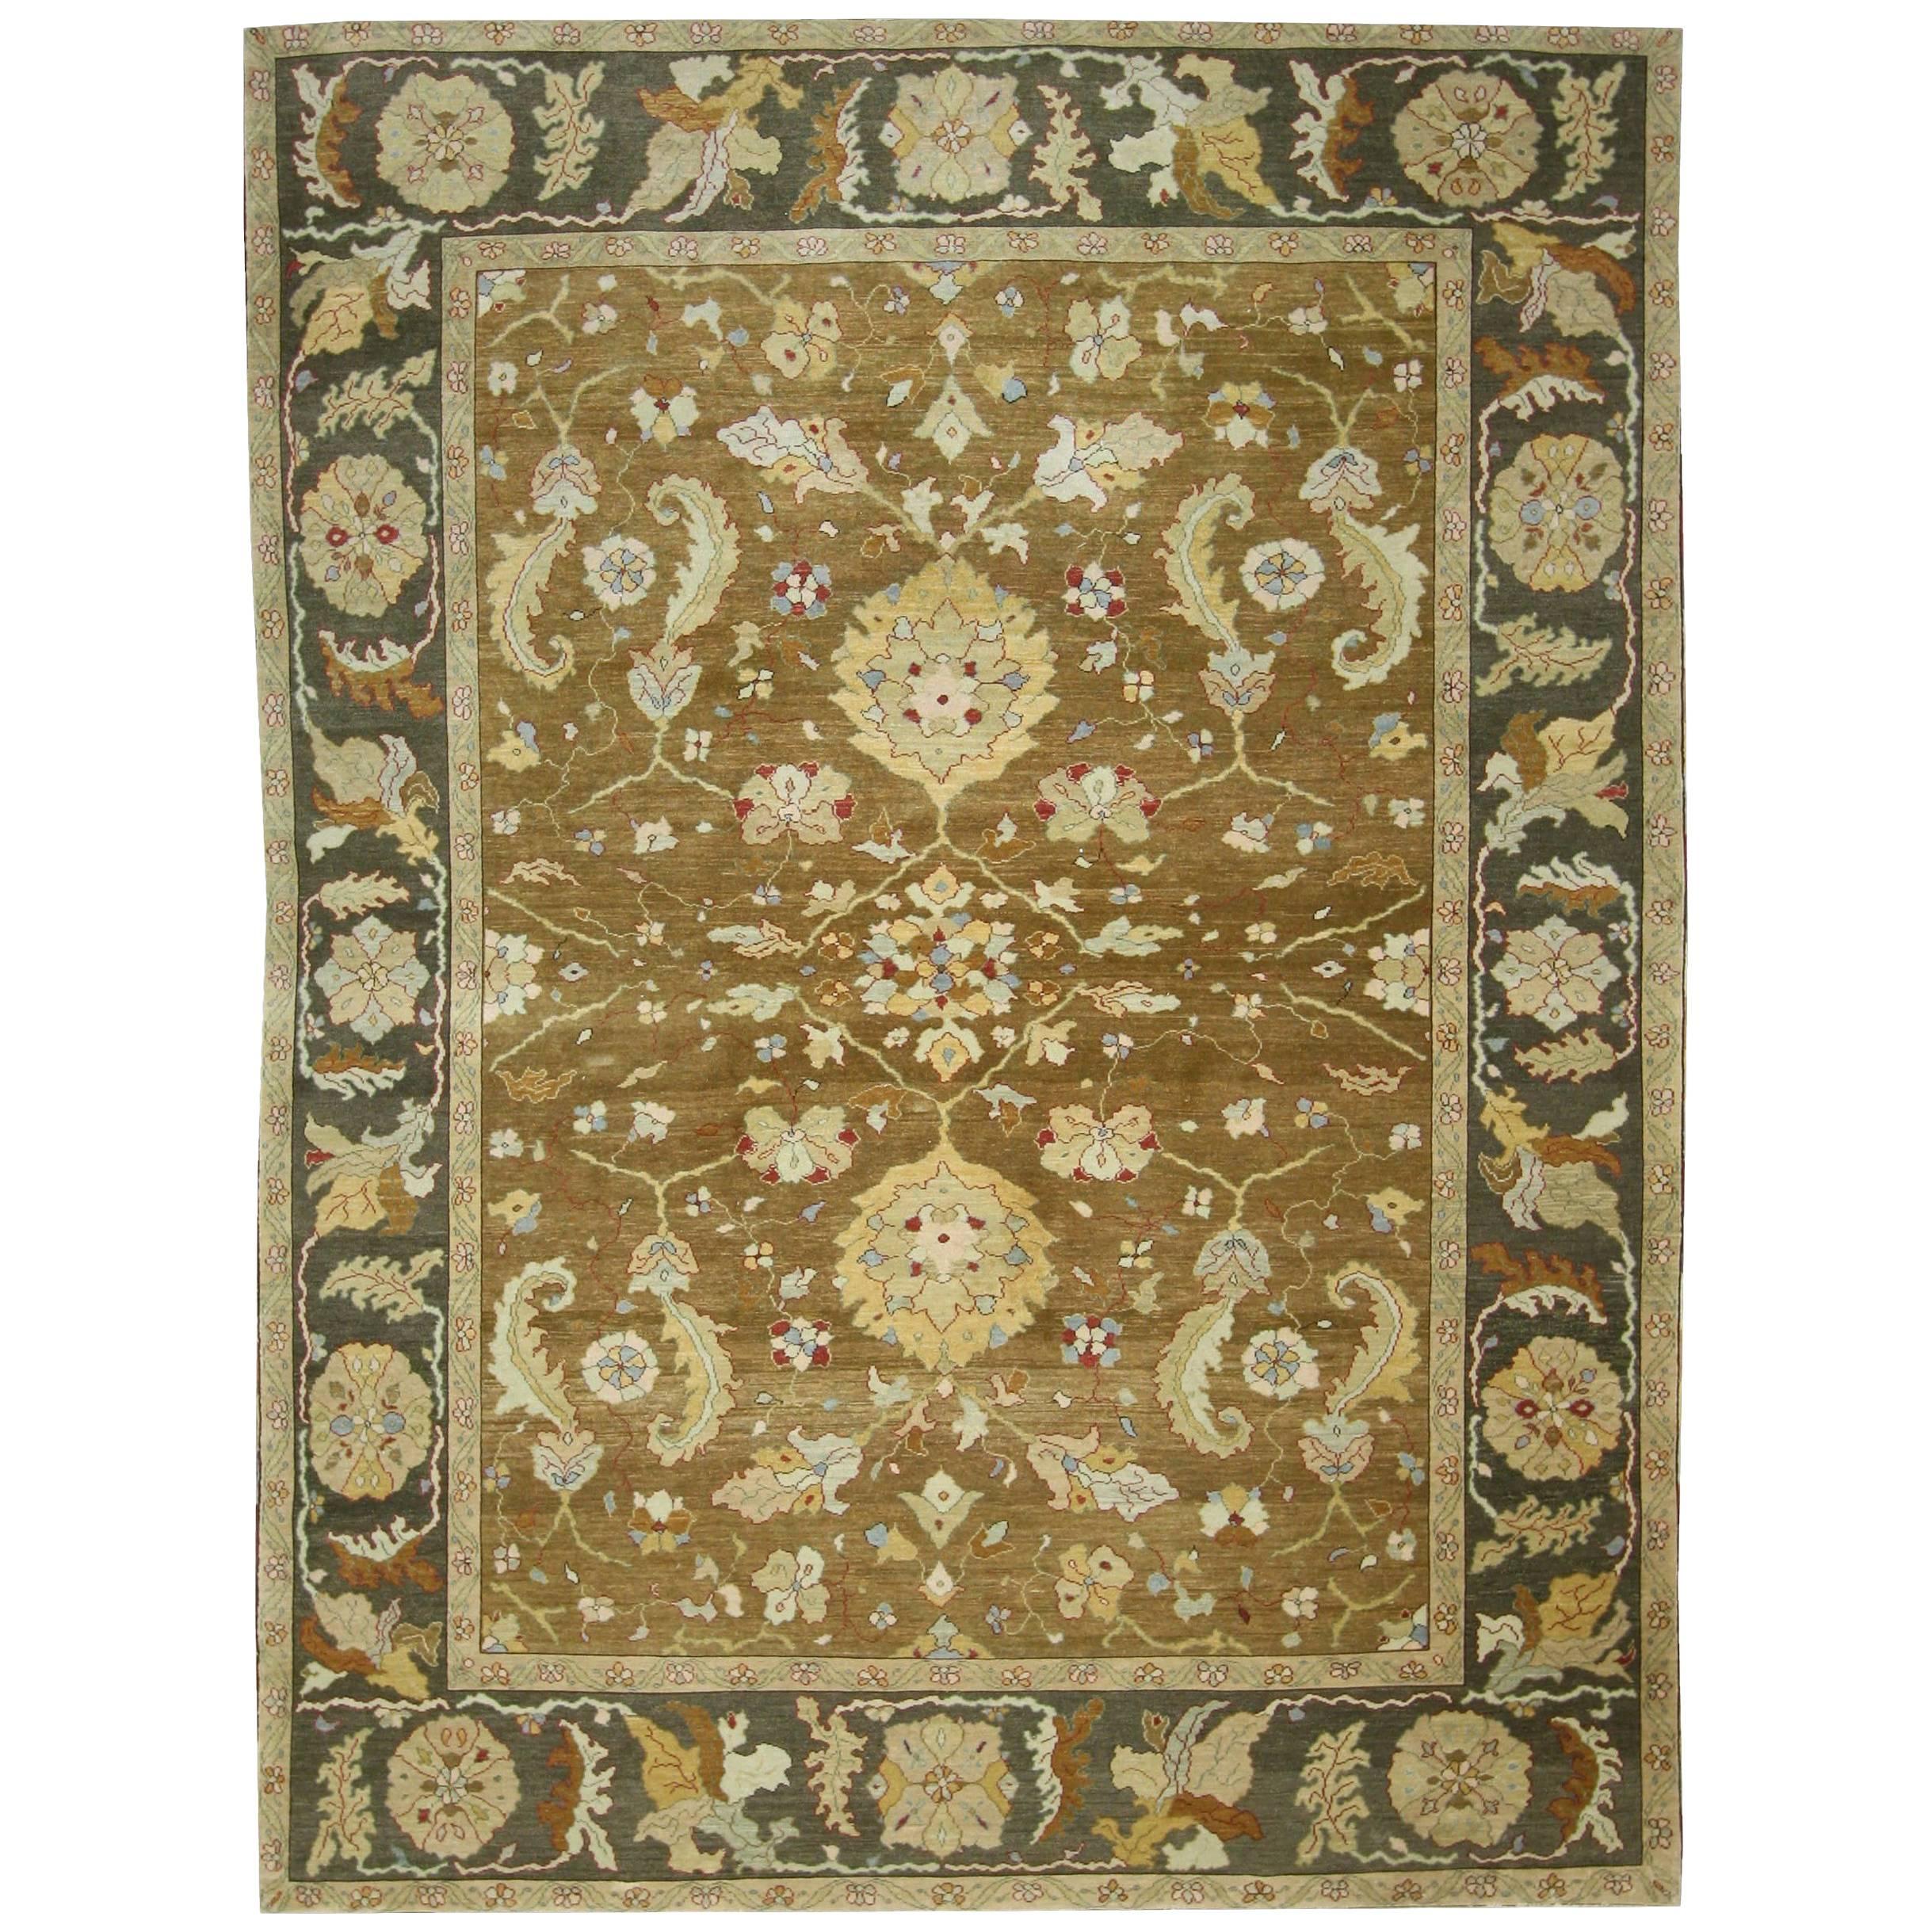 Vintage Turkish Oushak Area Rug with Modern Style in Warm Colors